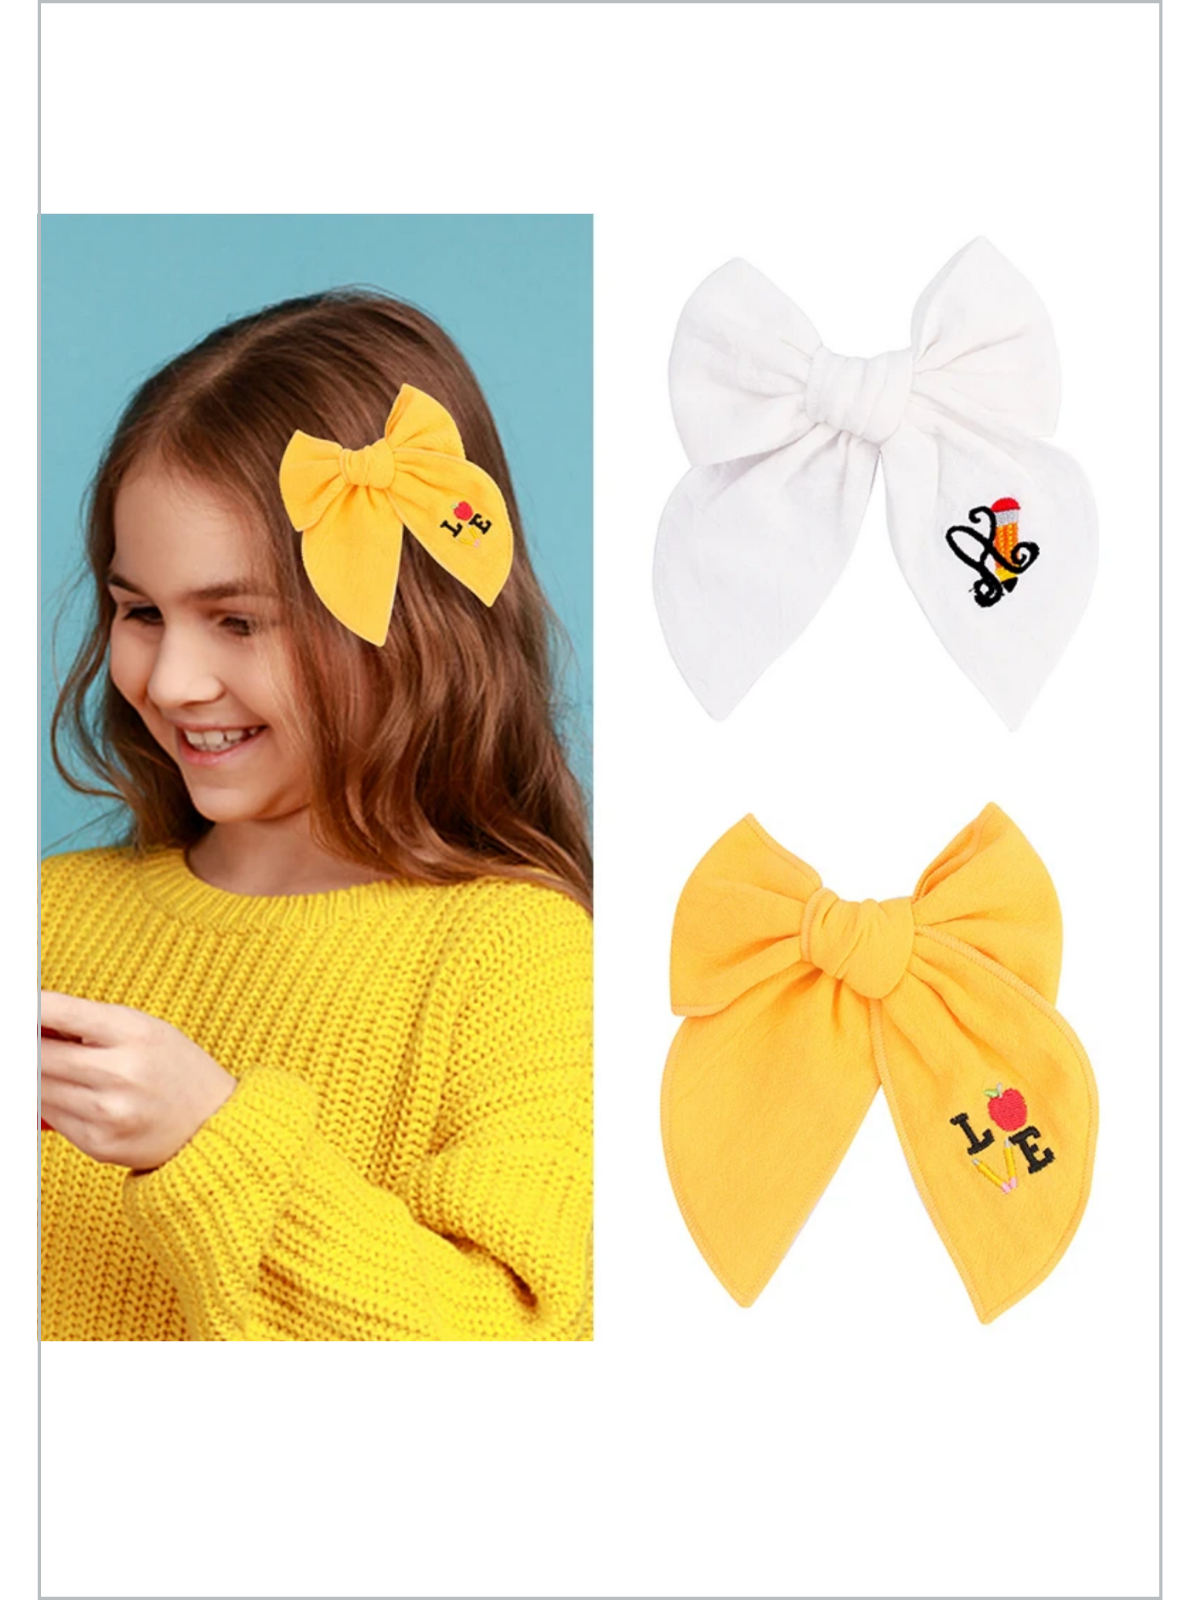 Girls School Accessories | Embroidered Hair Bow | Mia Belle Girls